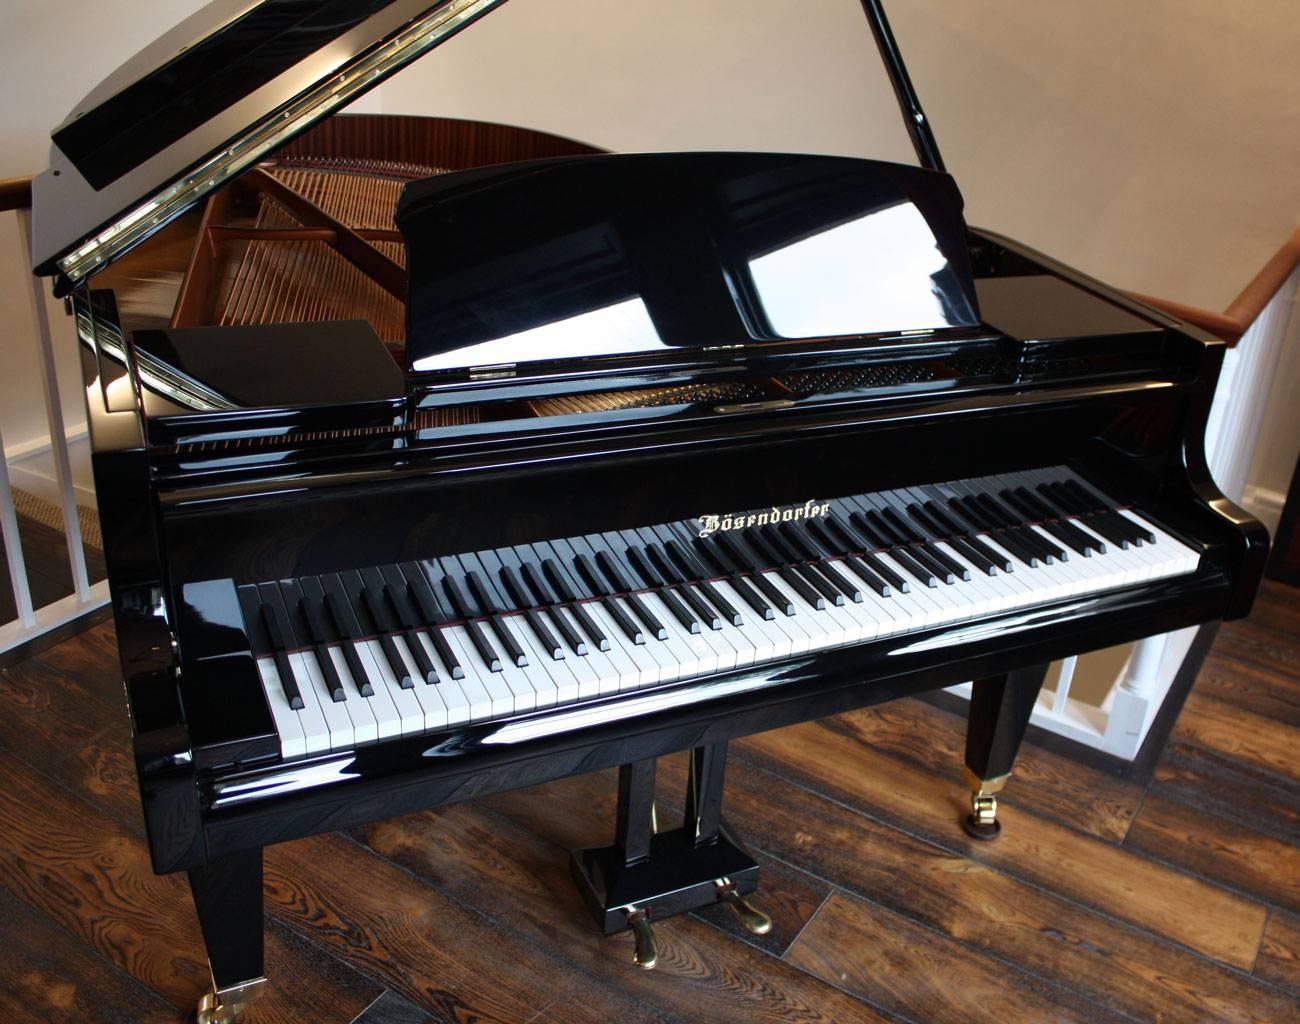 In general Bösendorfer’s are rare to find in the pre-owned piano market, partly due to their smaller production outputs. The Bösendorfer 170 is the perfect model for the living space and small music studio, measuring under 6 foot but not